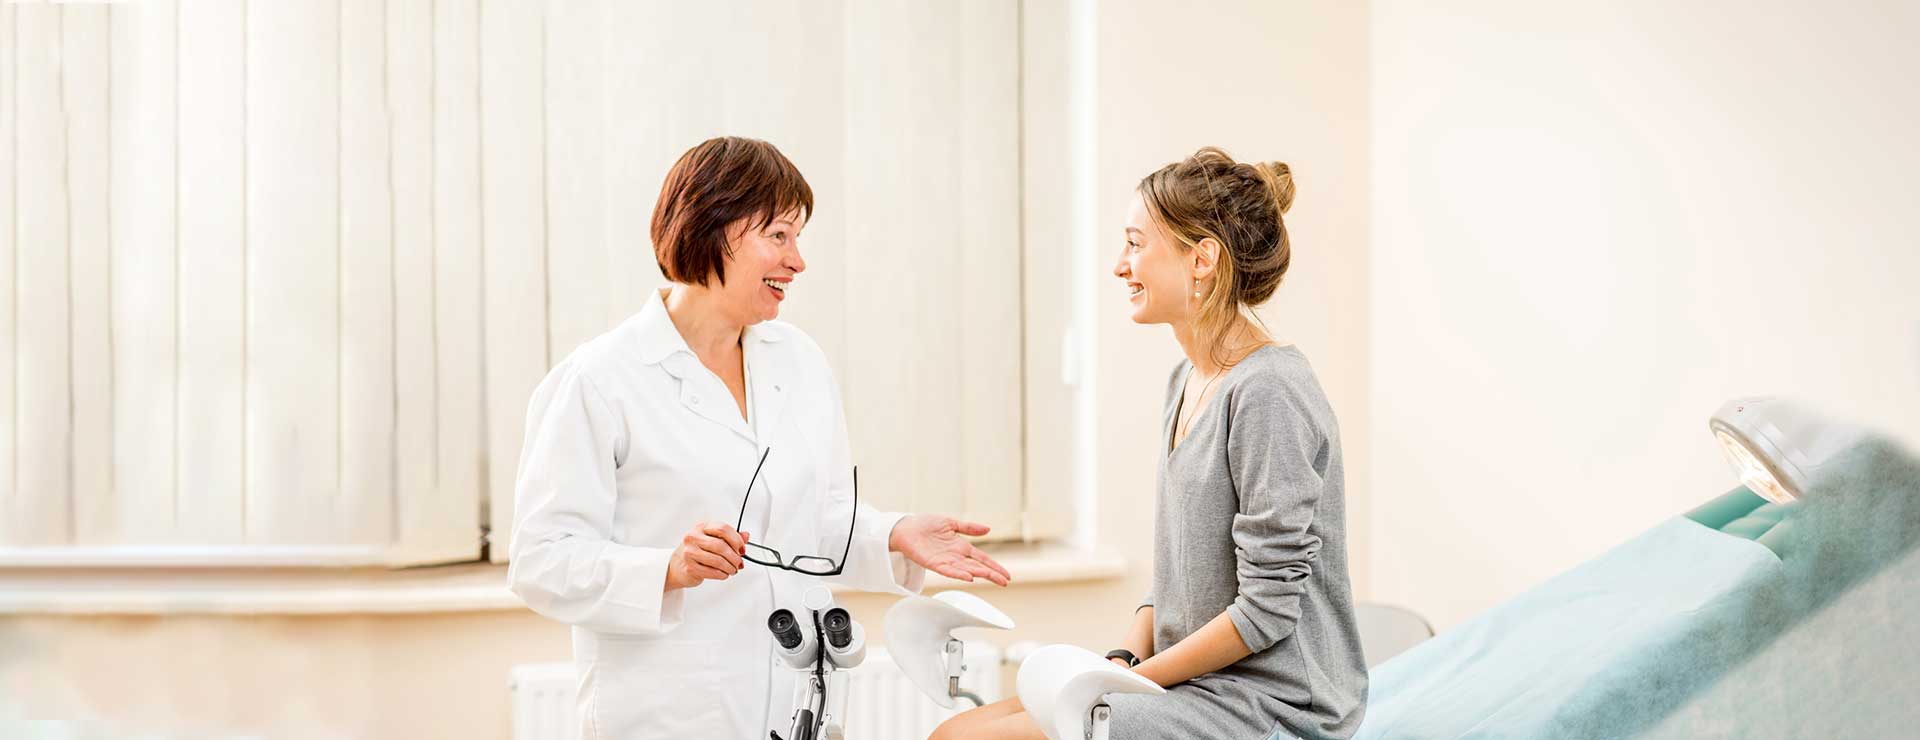 Specialized Gyno Exam - 7 Things You Should Always Discuss with Your Gynecologist ...